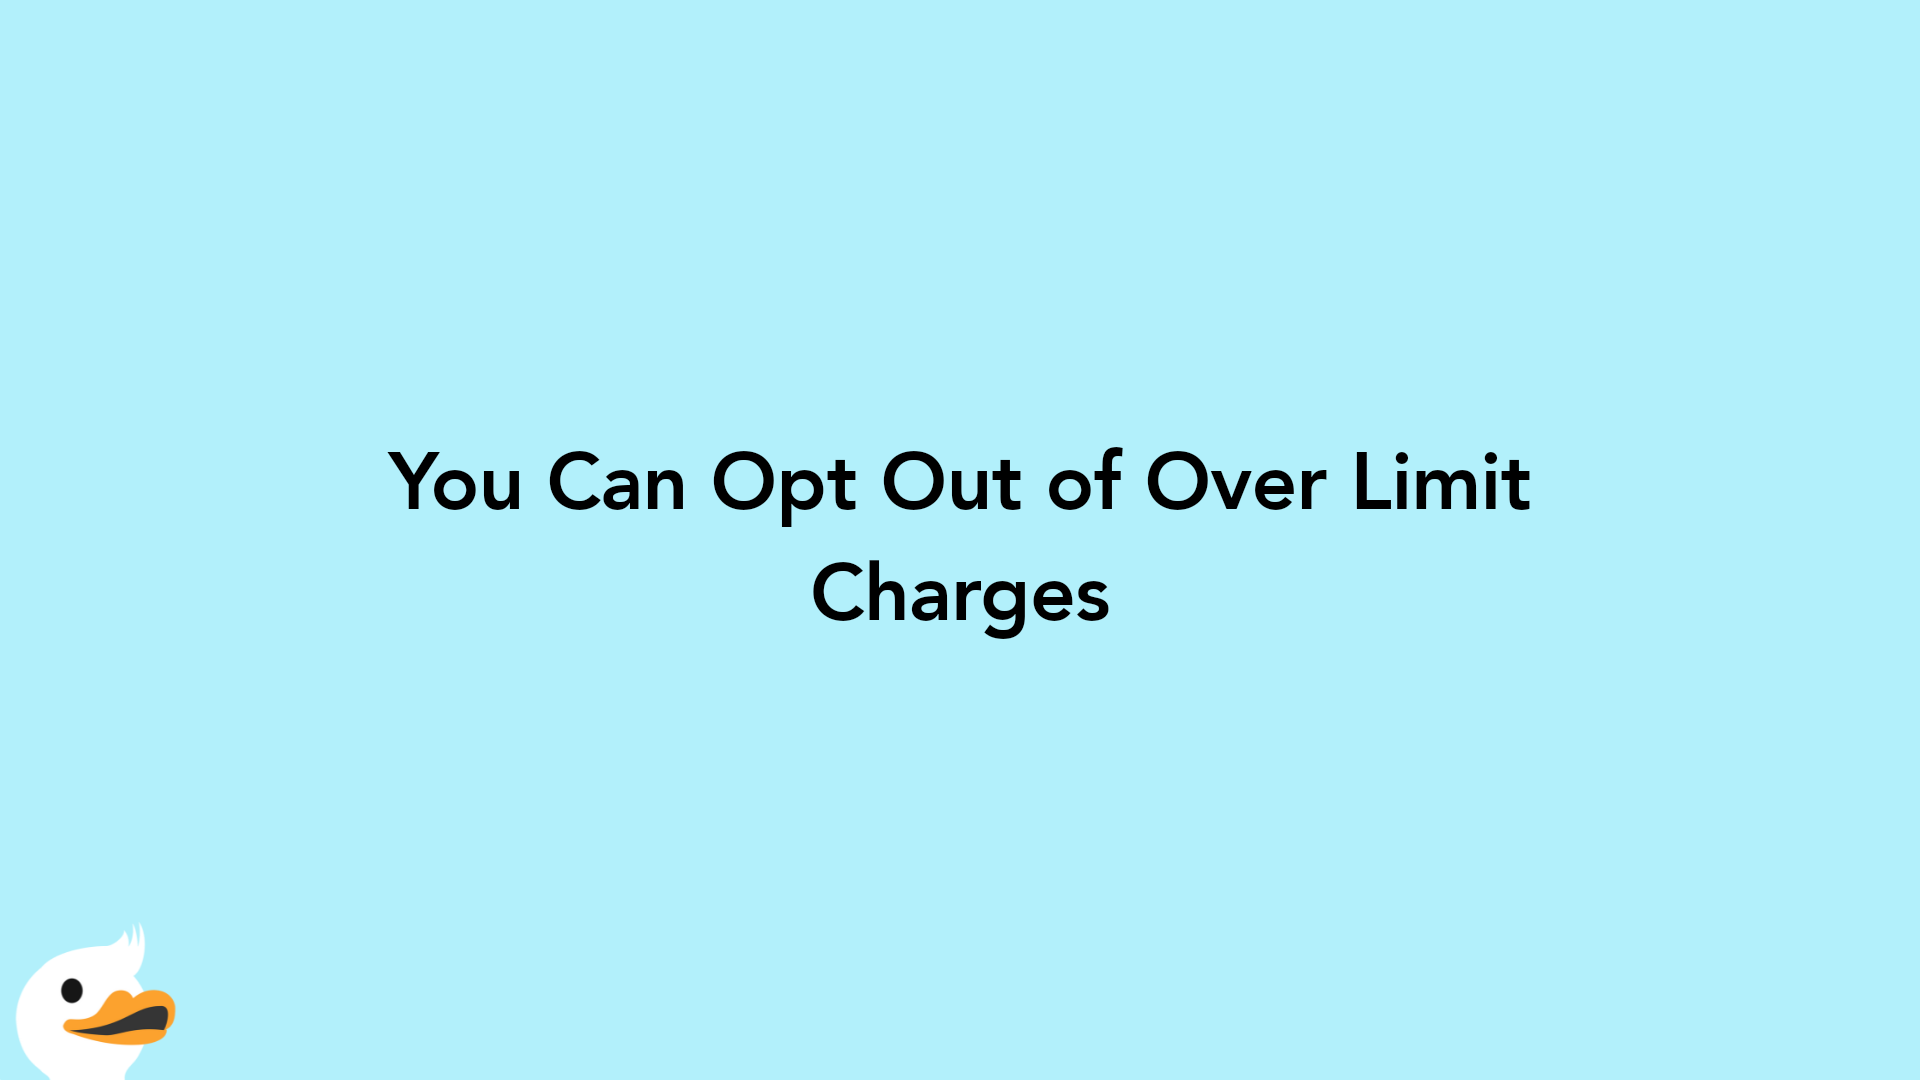 You Can Opt Out of Over Limit Charges